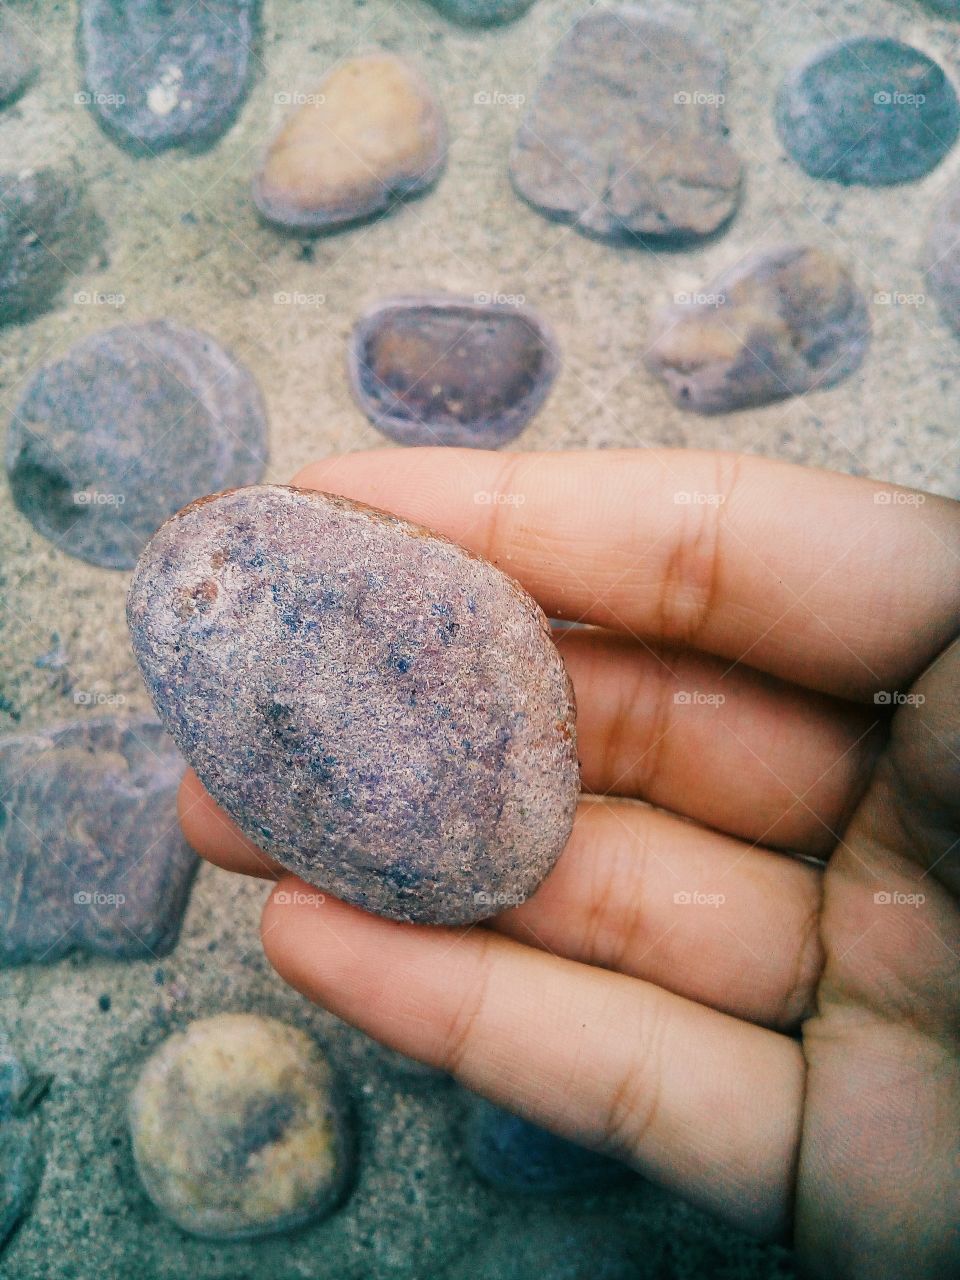 All Rocks May Looks the same, Round, Grey, Hard. But Created By Nature there all simple and beautiful in there own
 ways.